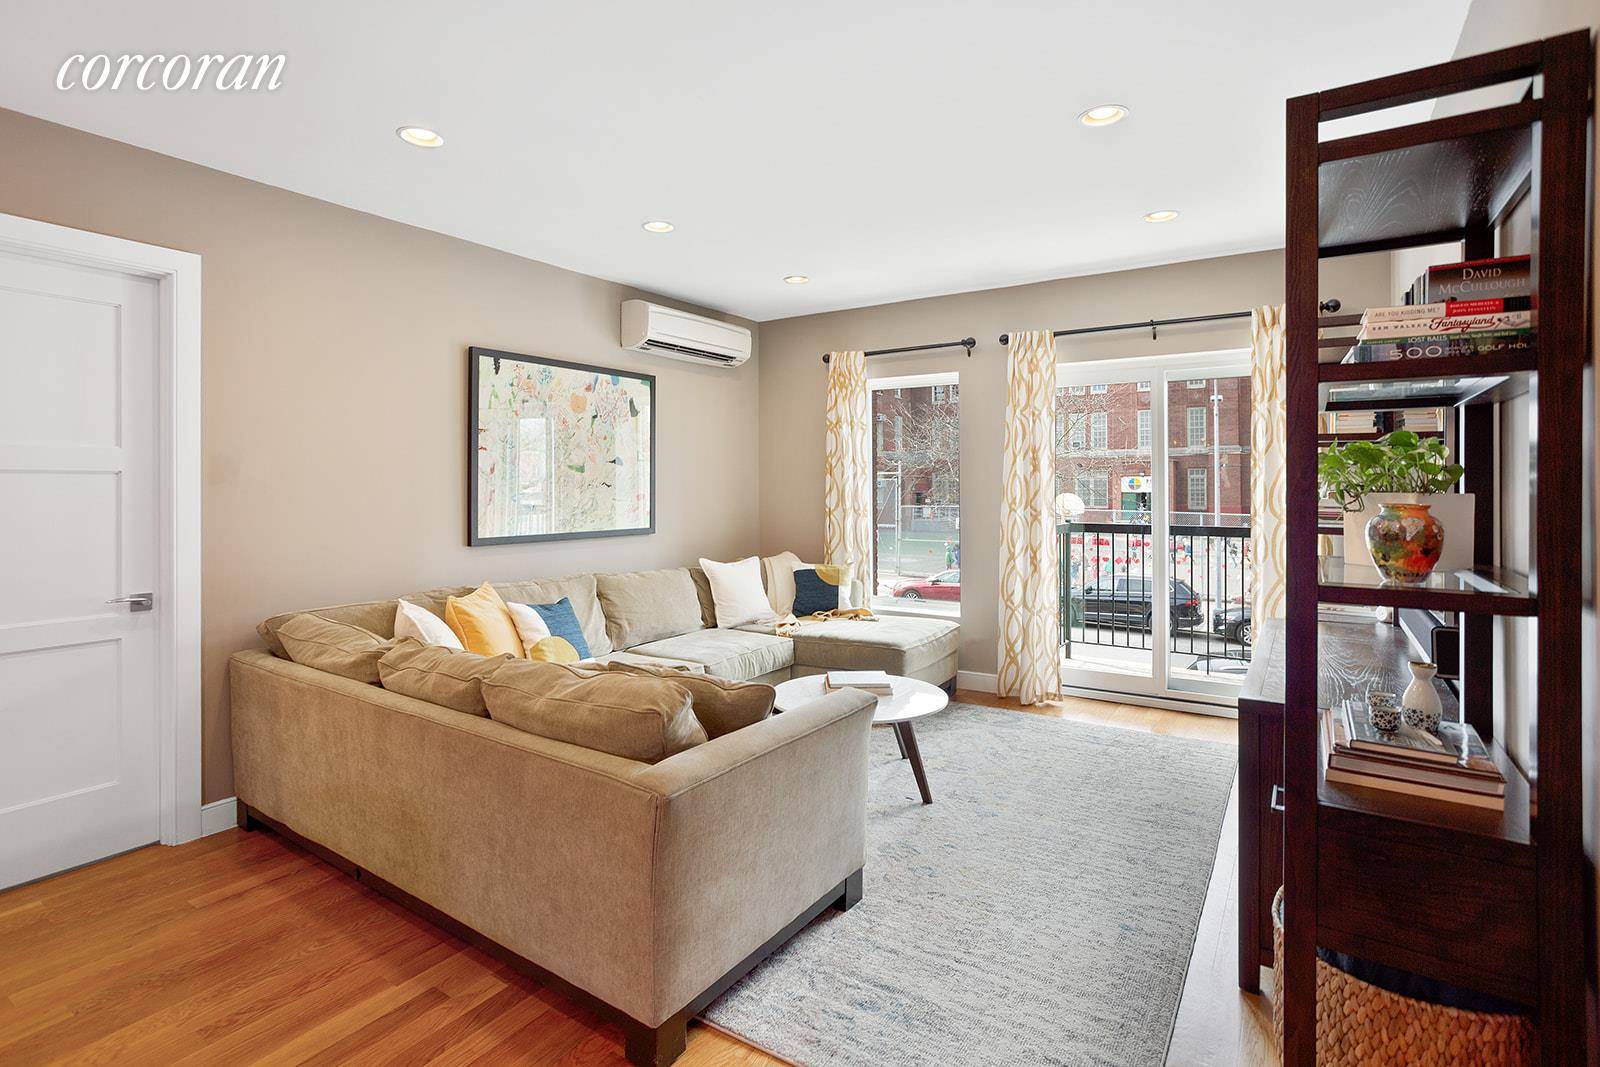 Welcome home to this sprawling, 1818 sqft, three bed, two and a half bath apartment with private storage and a deeded parking spot, ideally situated just one flight up !